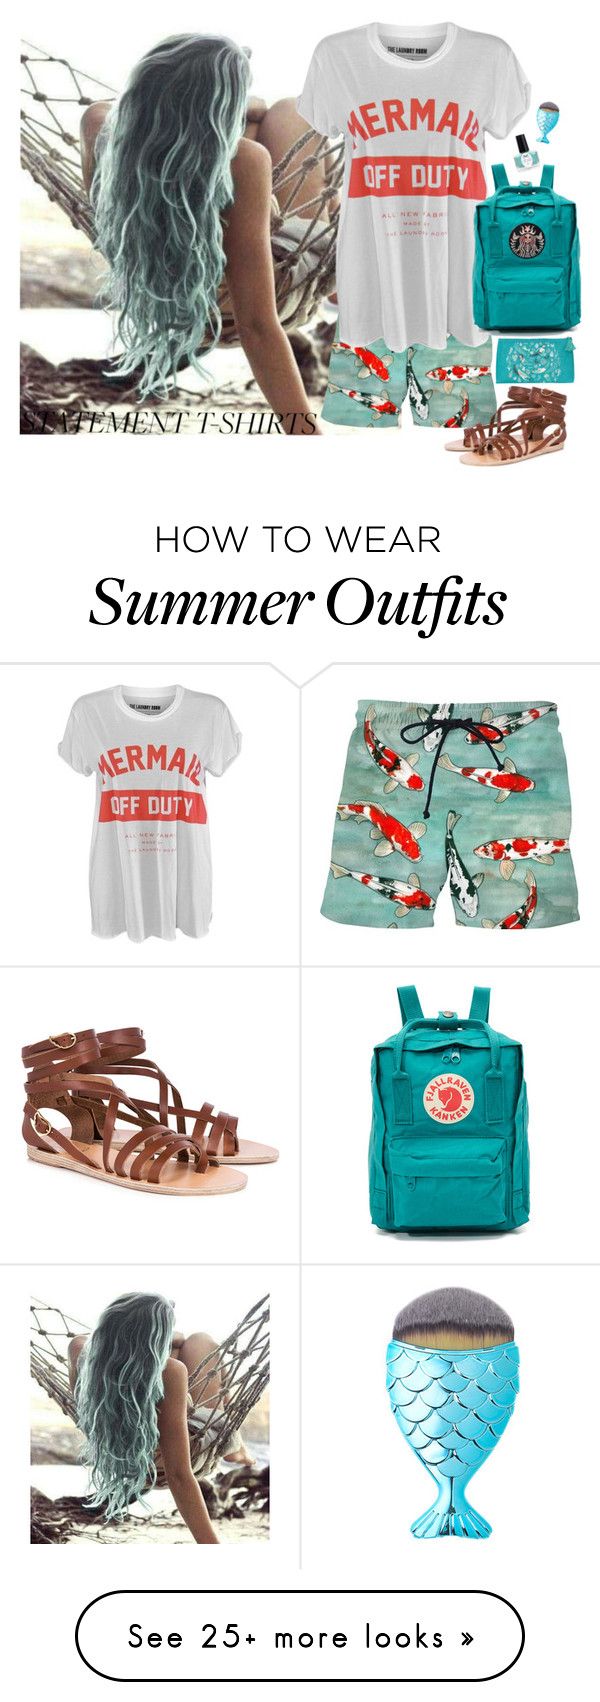 "Fintastic T-shirt!" by rachael-aislynn on Polyvore featuring Katie Pr...